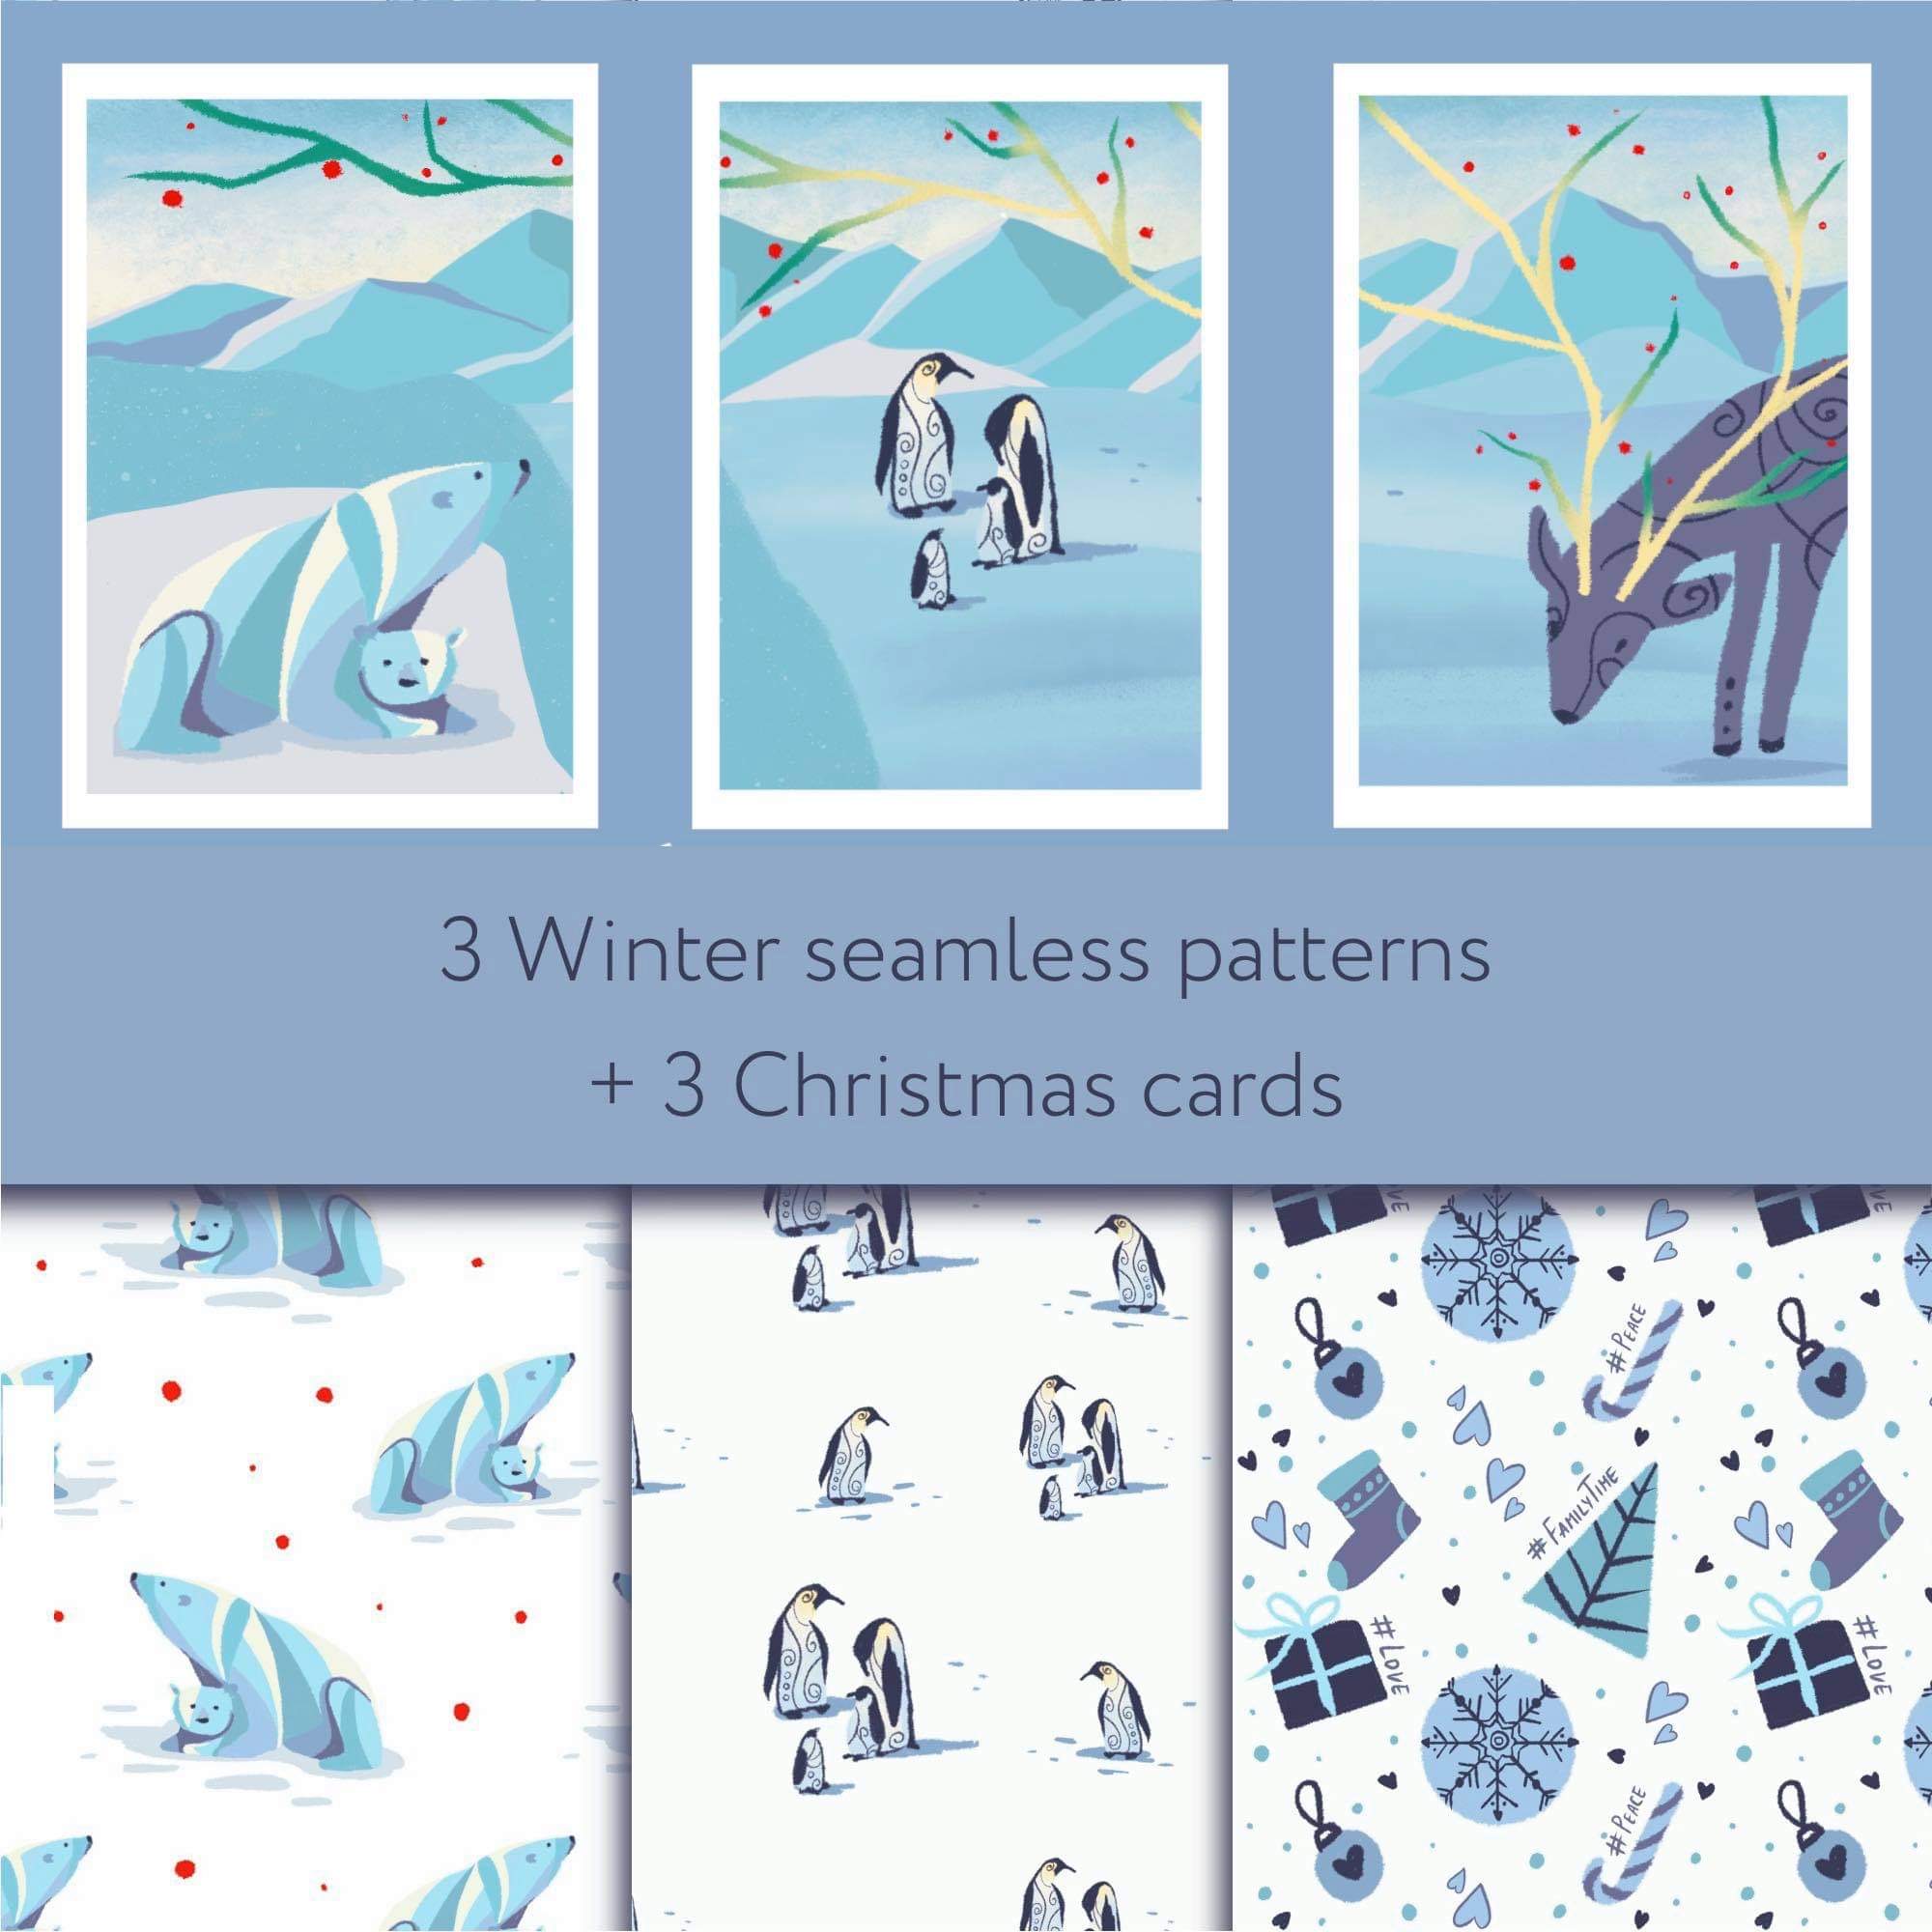 Winter Patterns and Christmas Cards cover image.